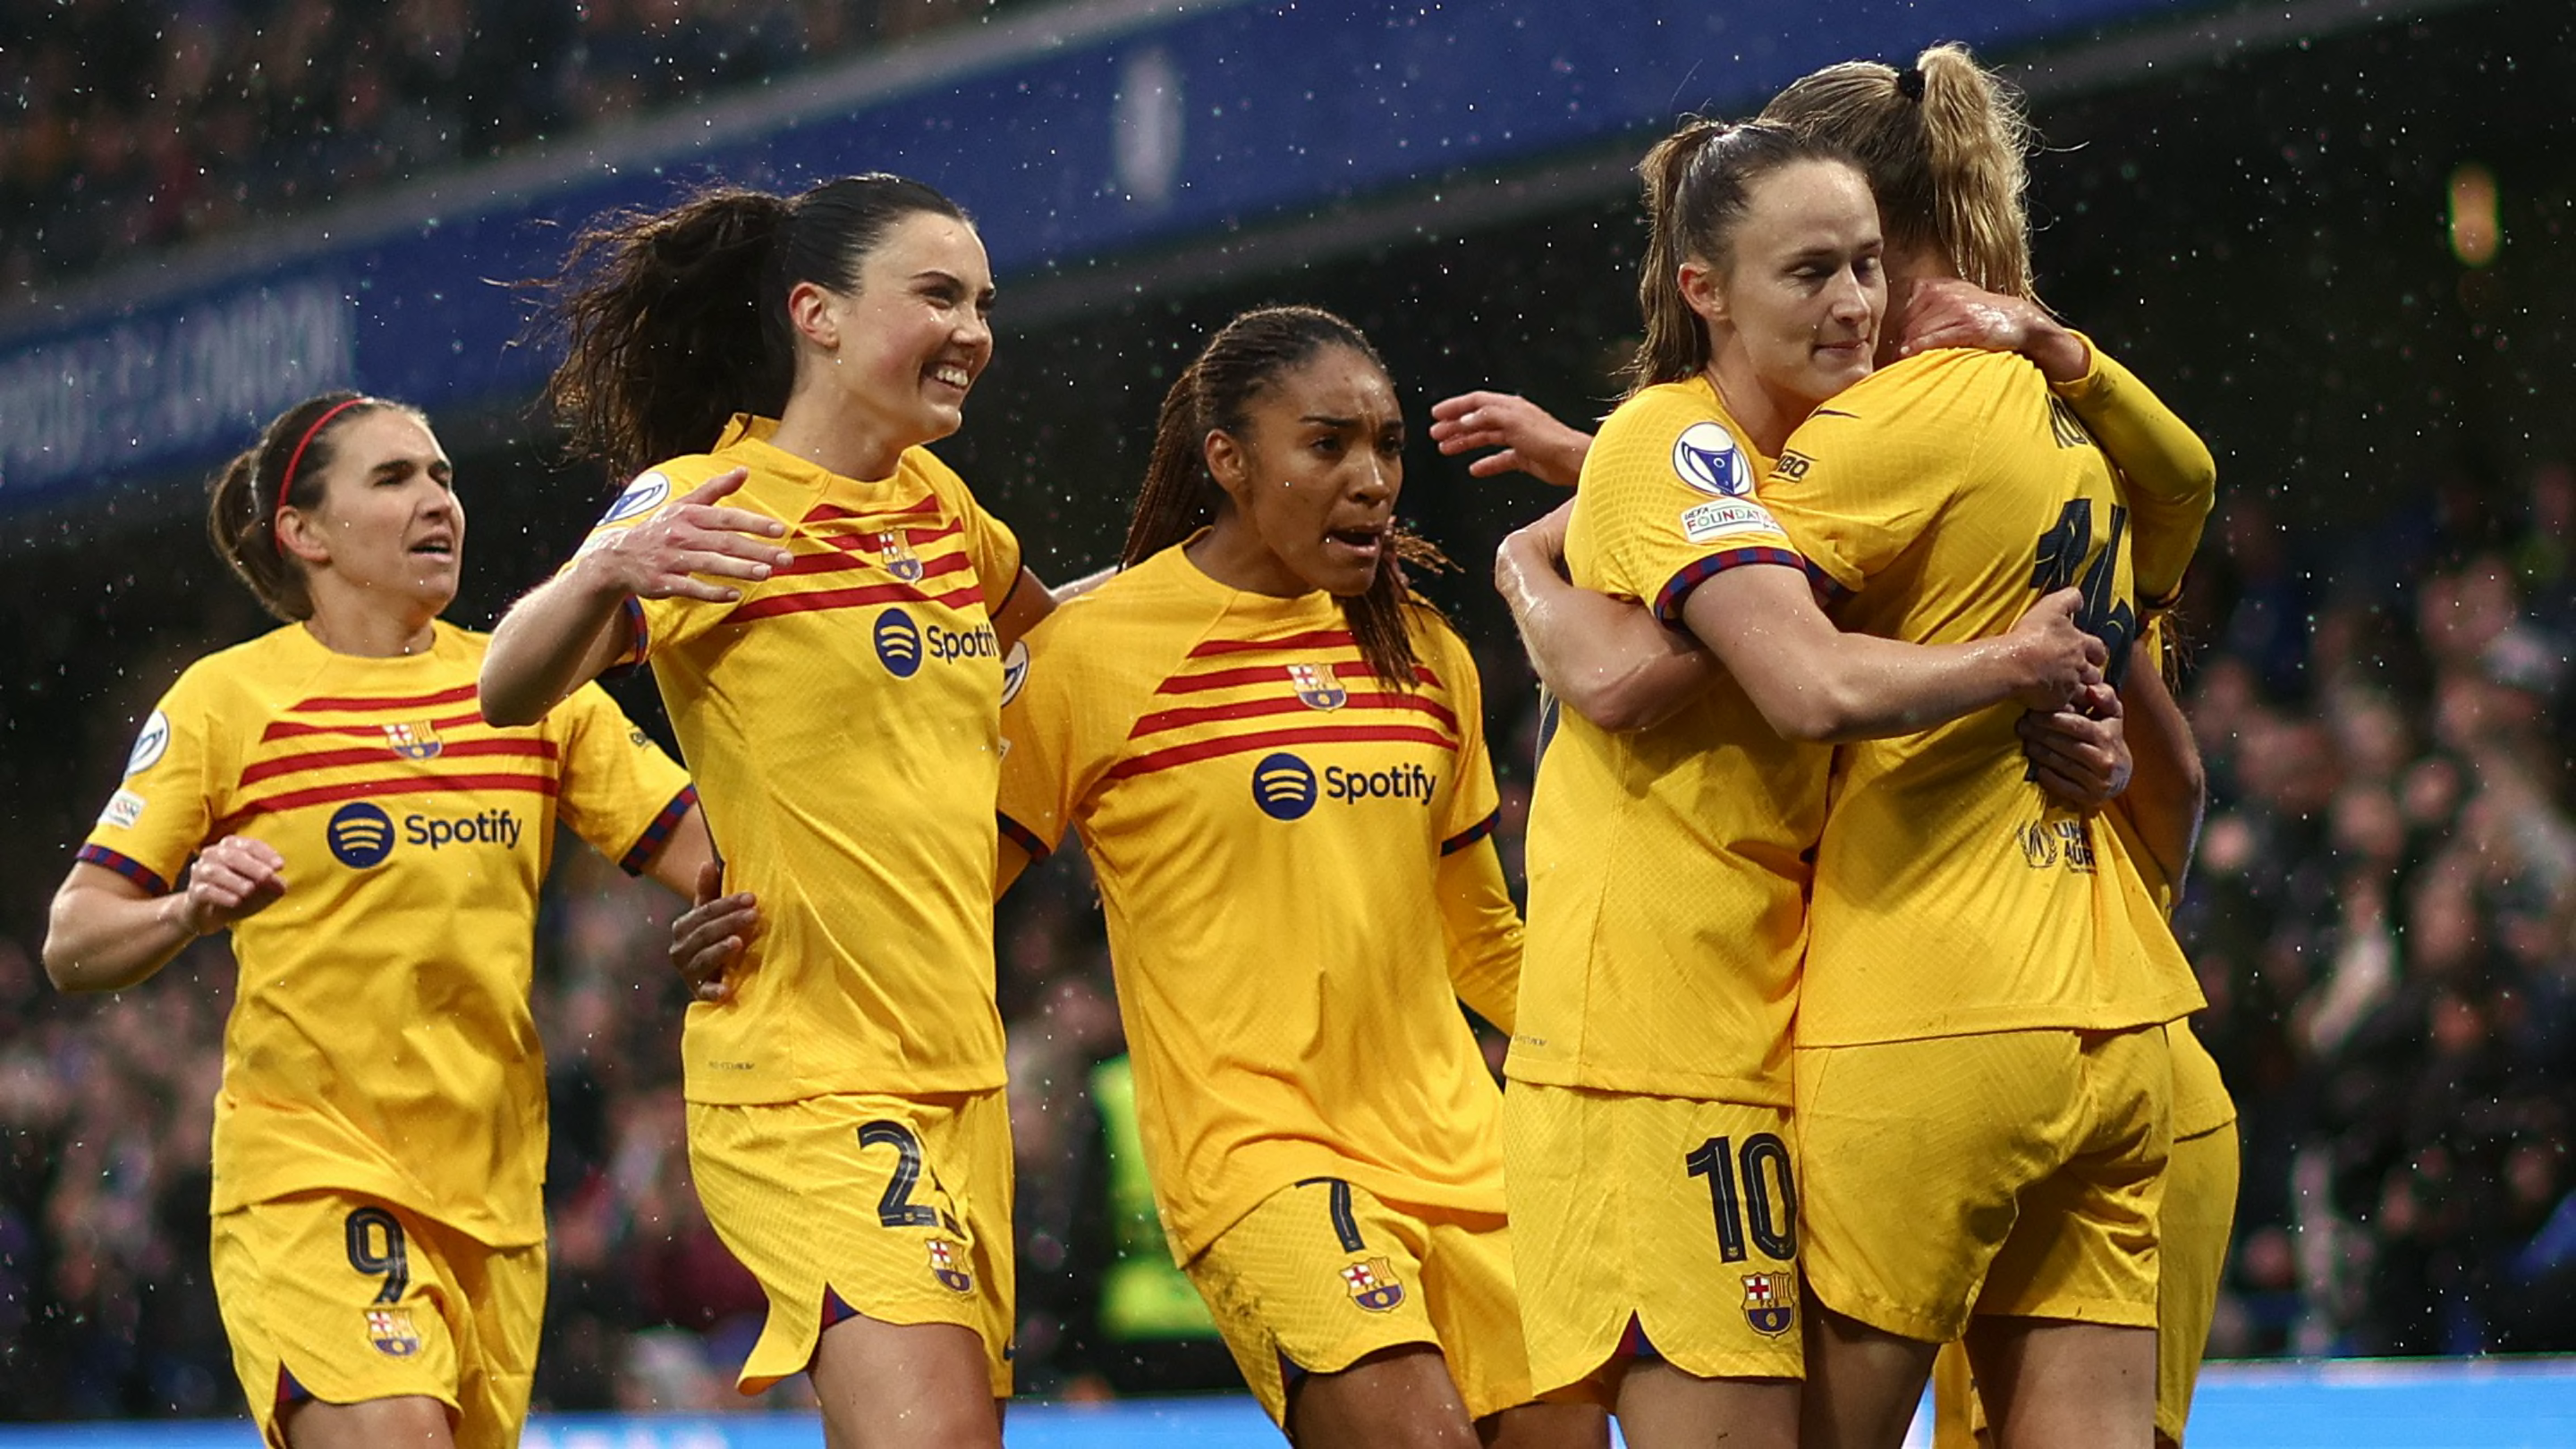 4 things that could decide the Women's Champions League final